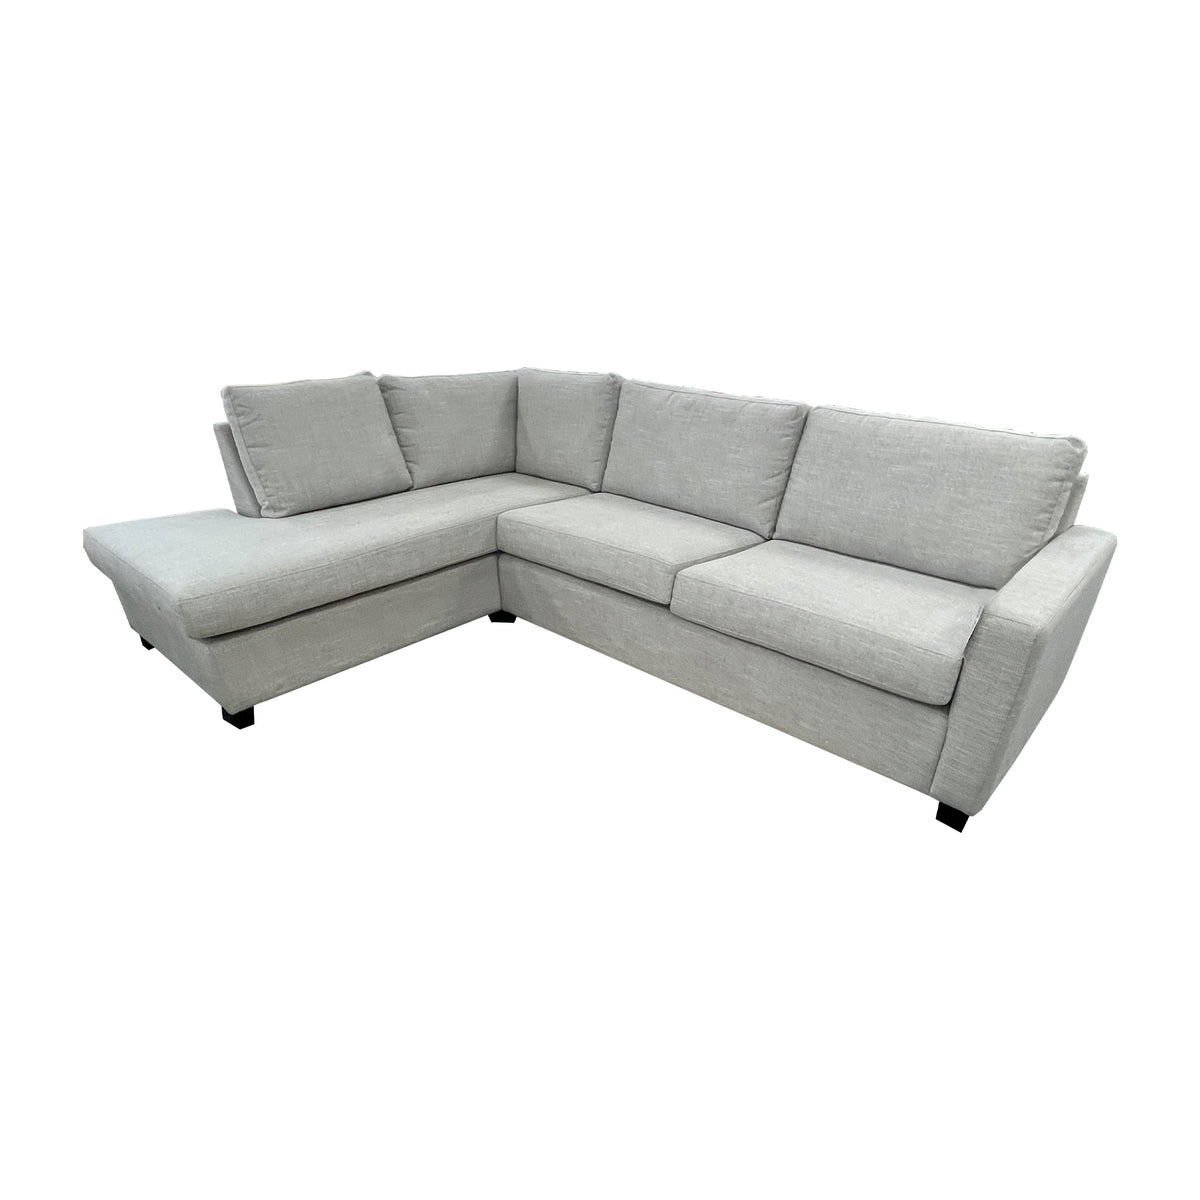 Raven 3Seater with Corner Extension Chaise in Massimo Pumice